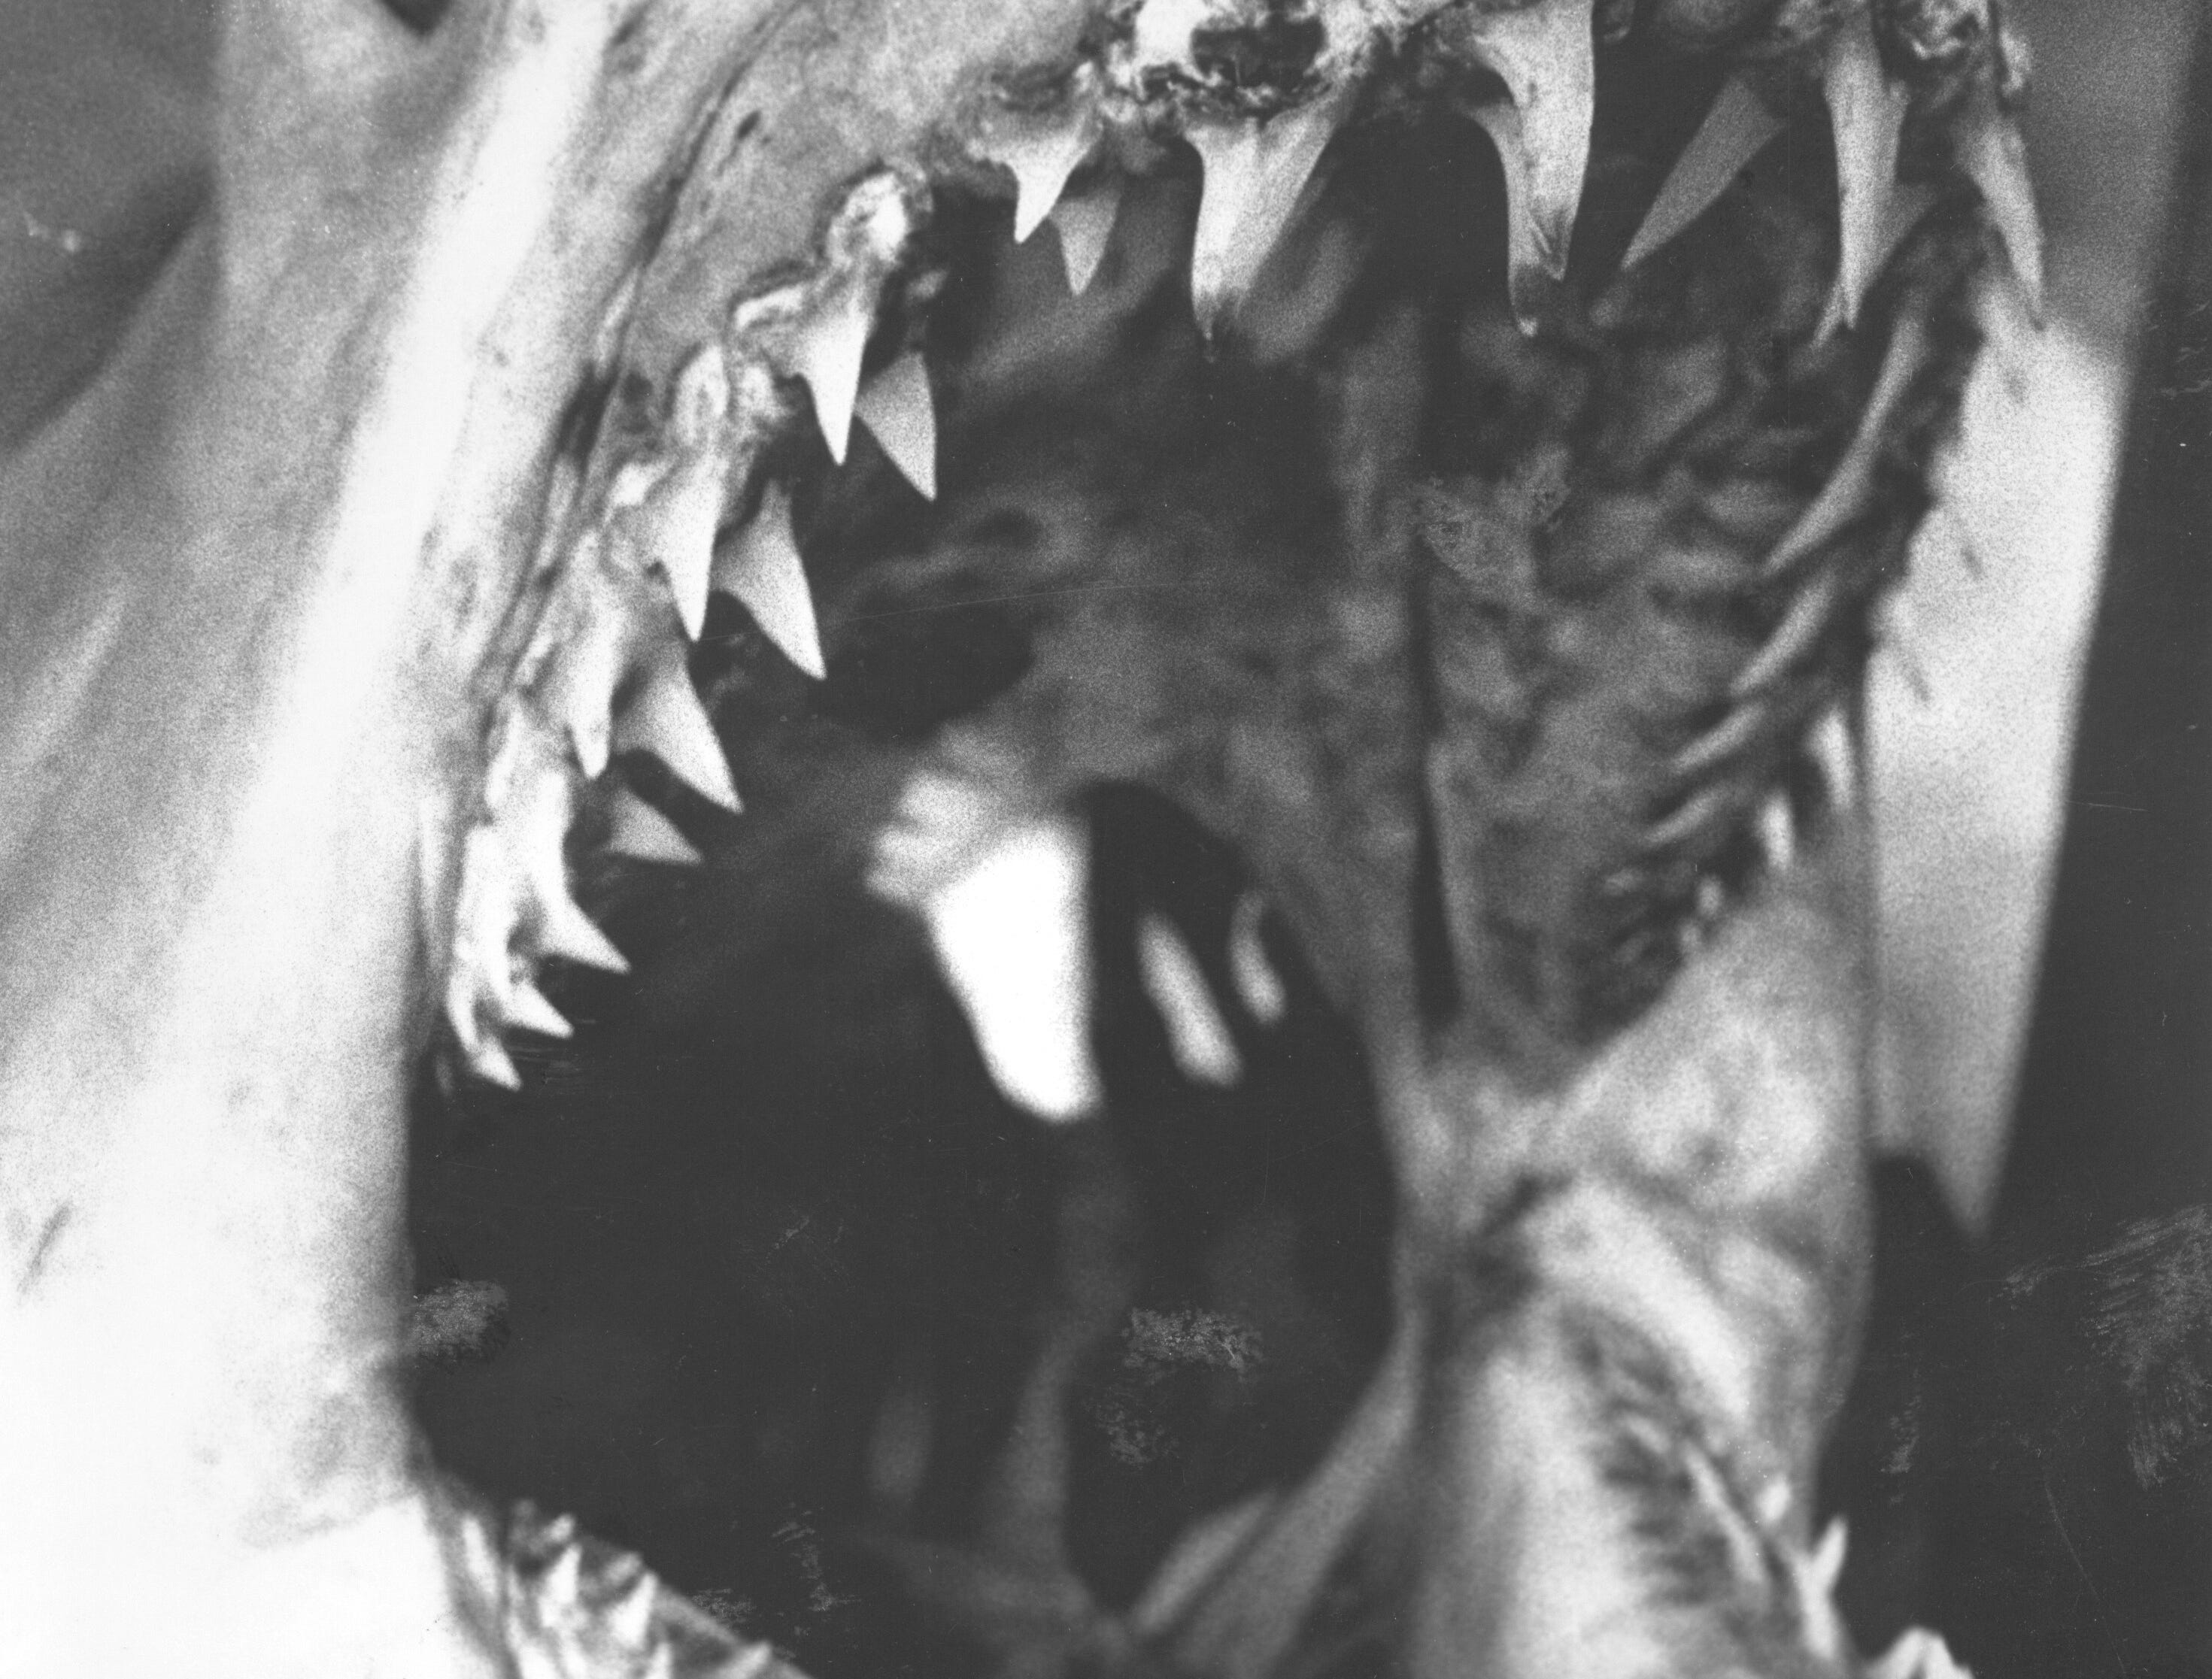 (JUNE 5, 1981) Shark anglers will be looking for Jaws this weekend with the opening of the 8th Annual Mako Shark Tournament (1981), sponsored by Hoffman's Anchorage, located in Brielle.